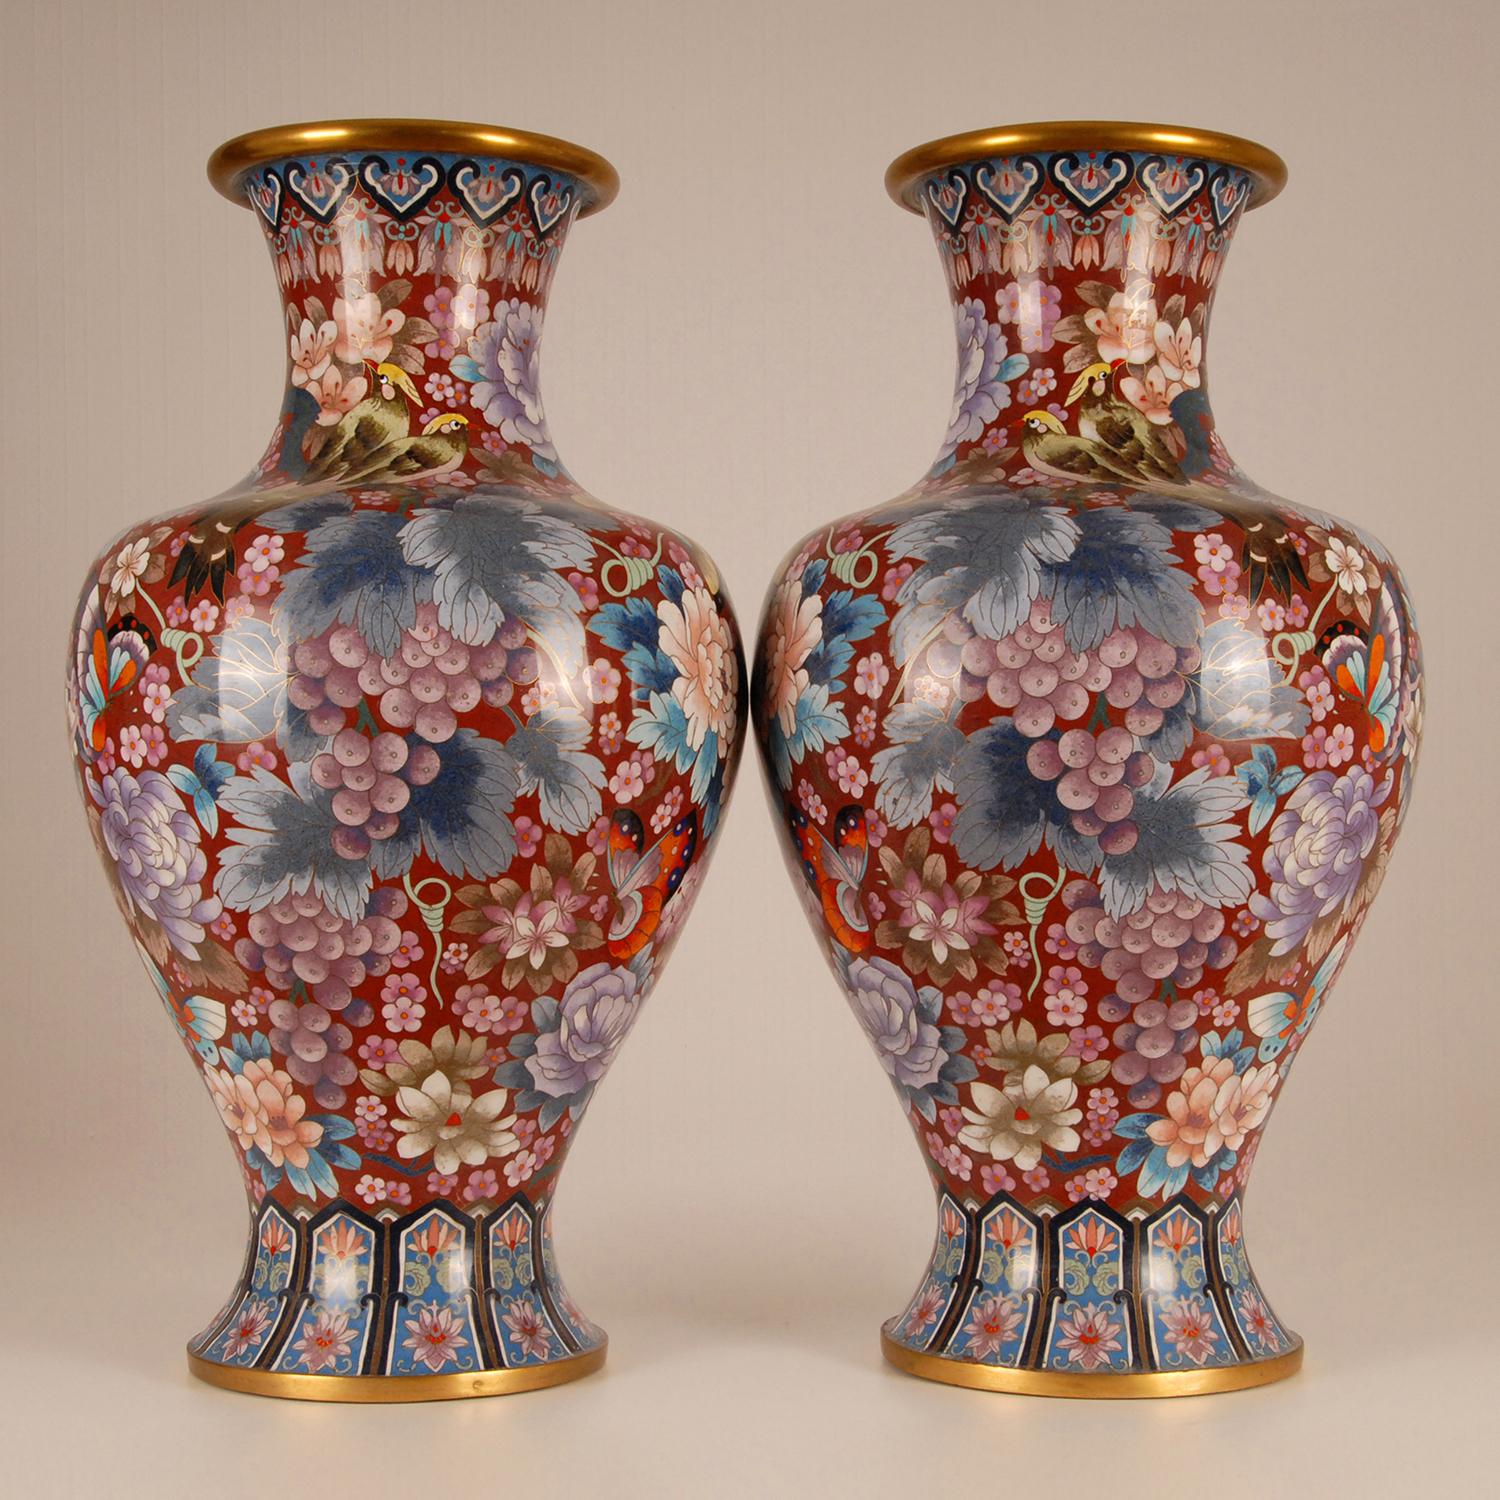 Chinese Cloisonne Gilded Bronze Baluster Vases Enameled Republic Vases a Pair In Good Condition For Sale In Wommelgem, VAN